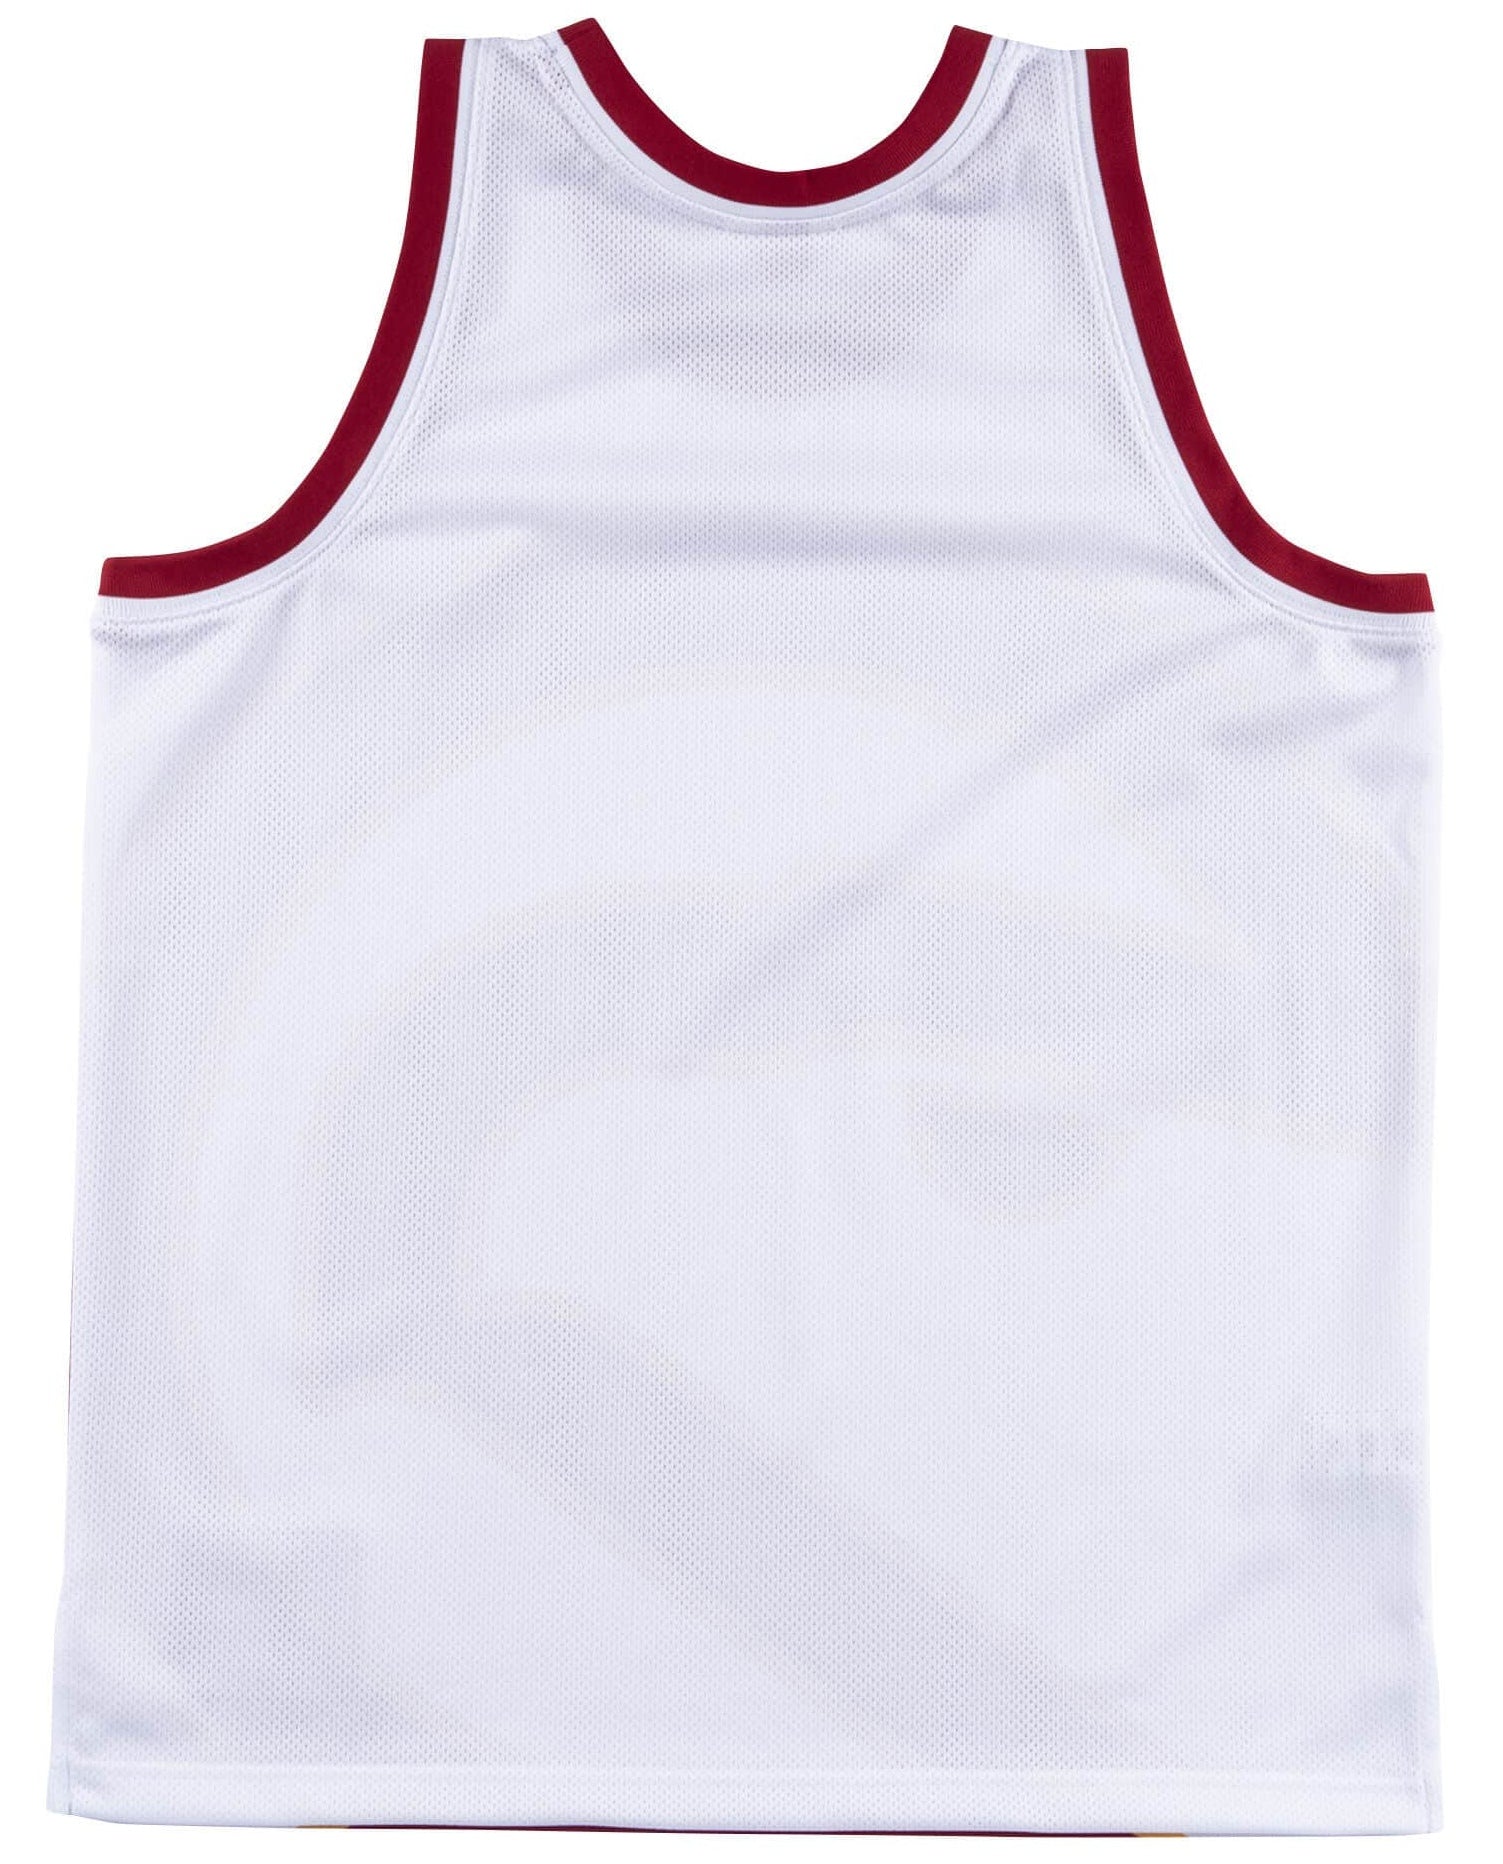 mitchell and ness blank jersey